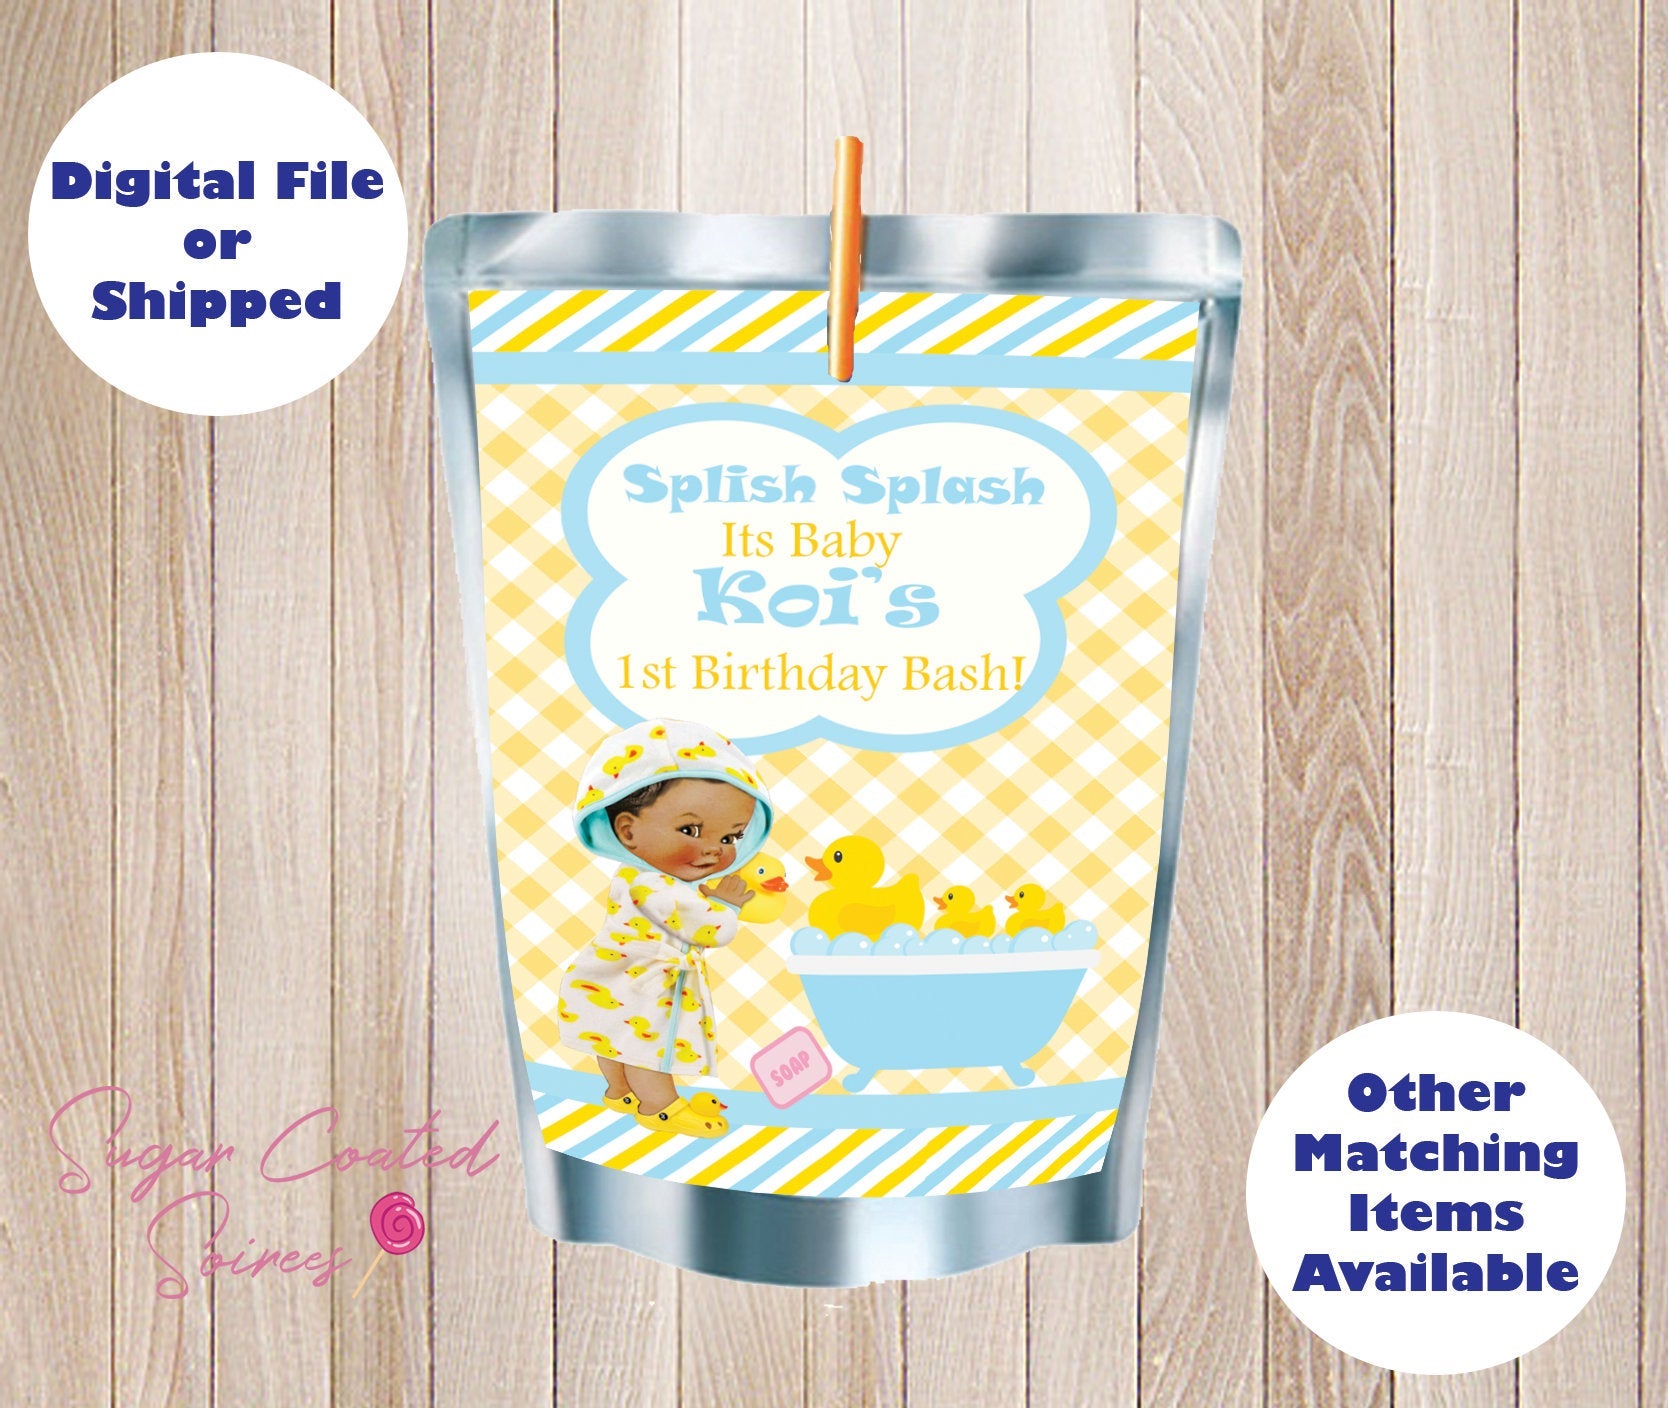 SHIPPED PRINTED Rubber Duck Royal baby shower Personalized Capri Sun Juice Label, Birthday Party, Party Favor, DIY